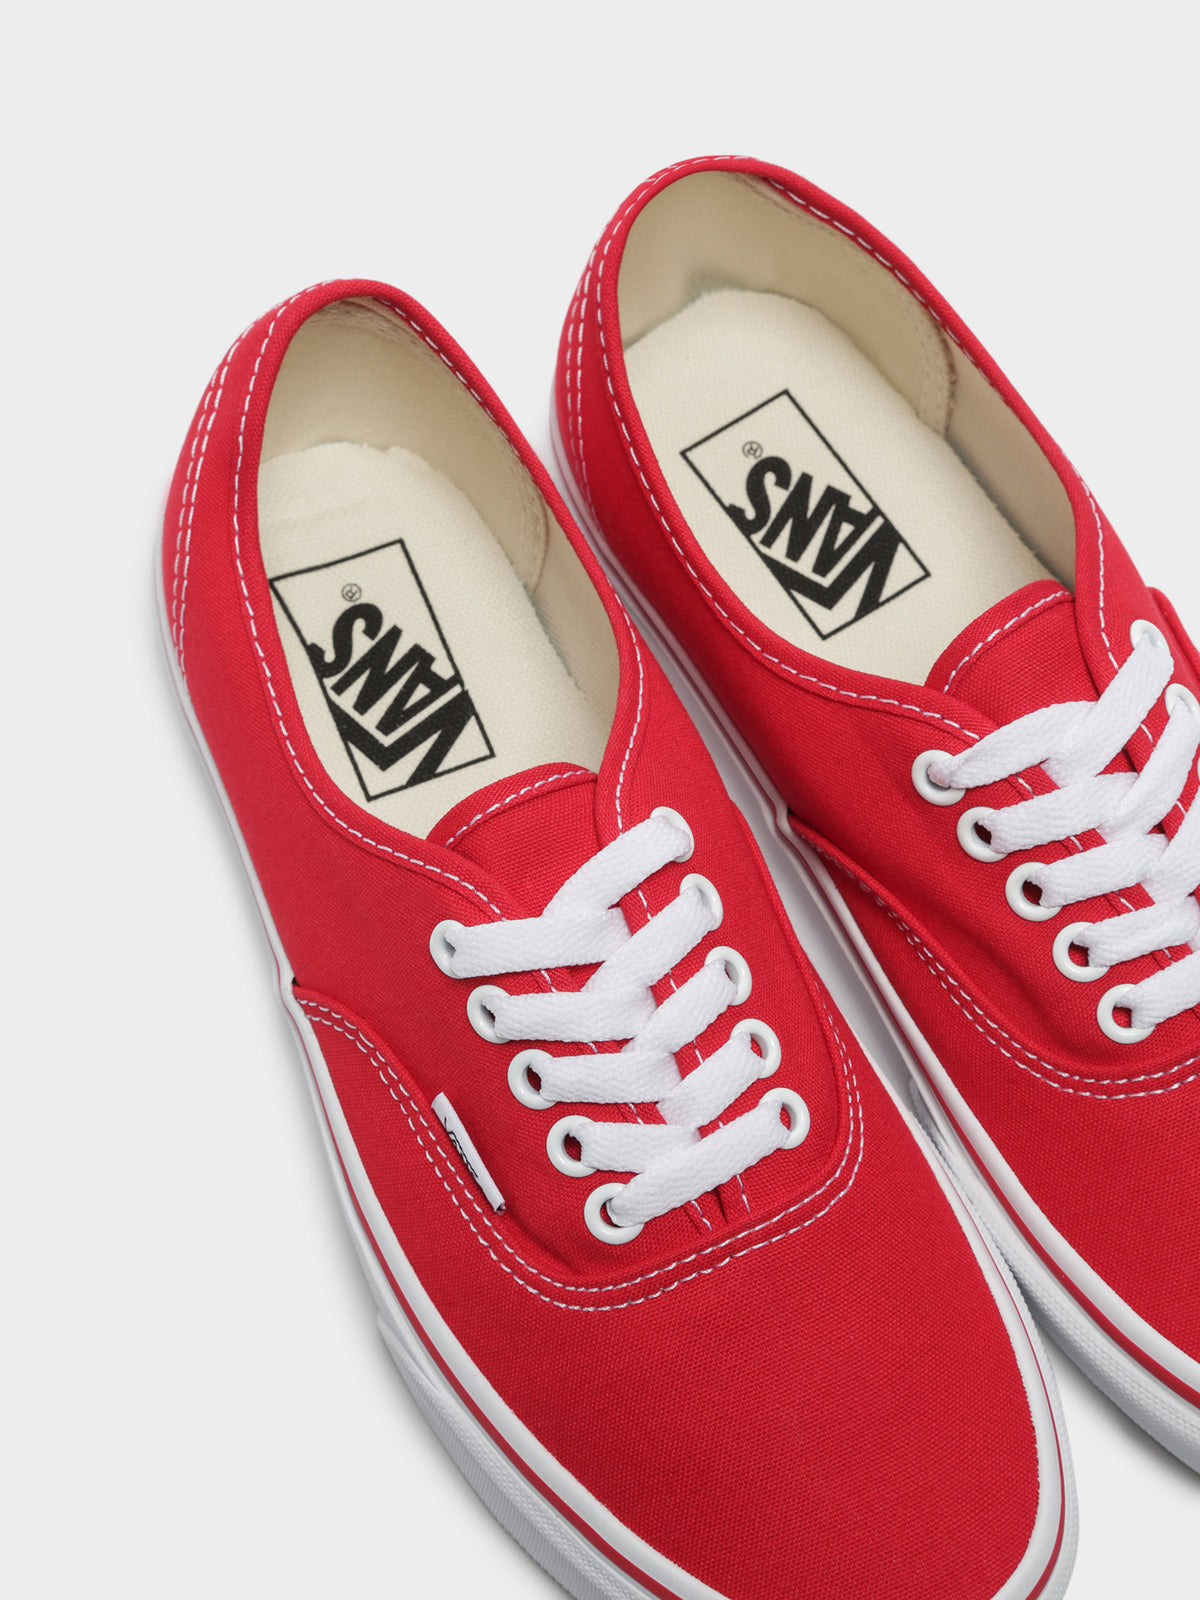 Unisex Authentic Sneakers in Red